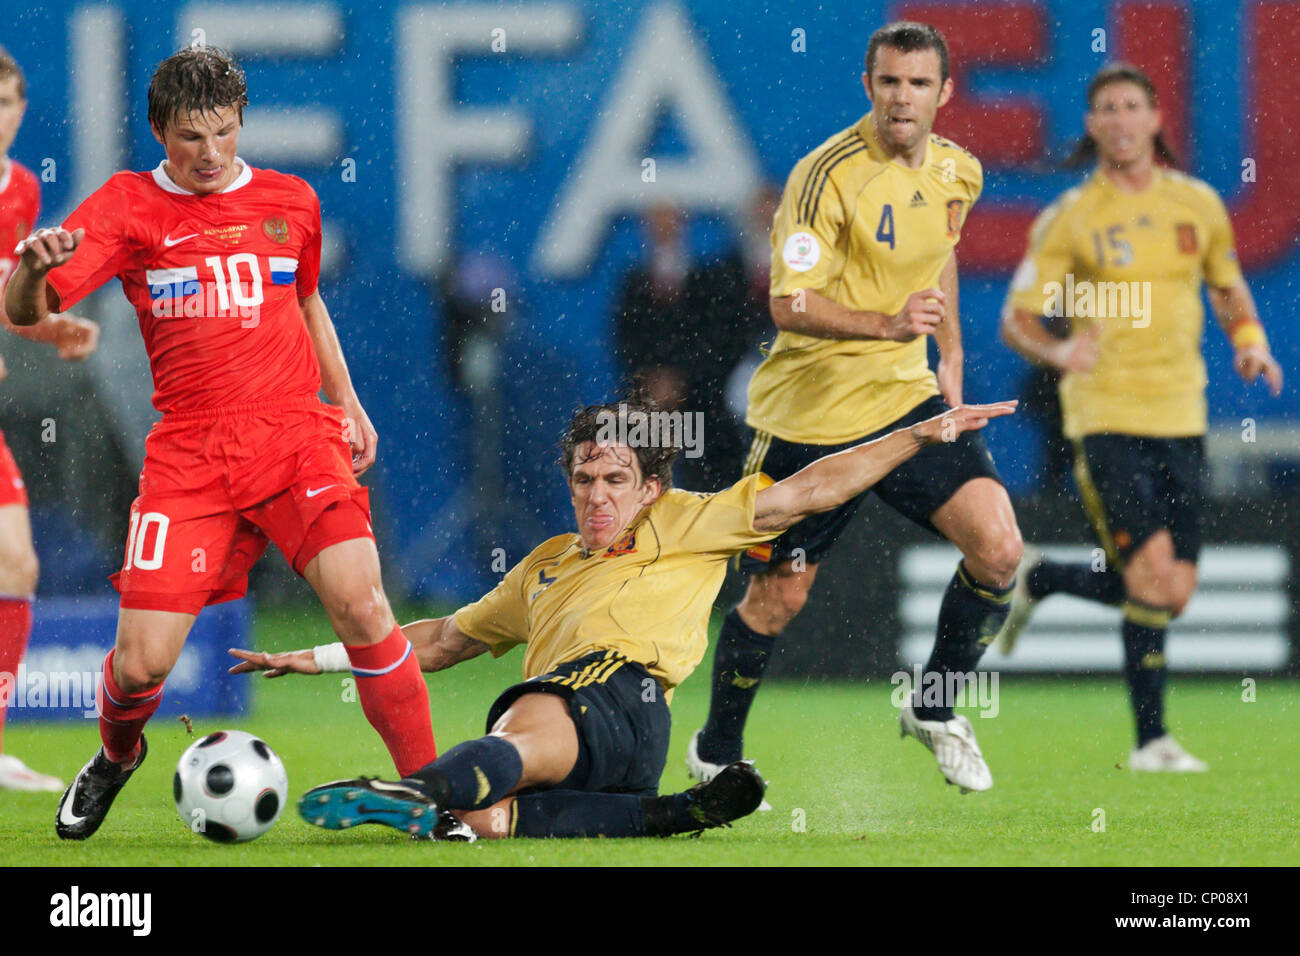 Carles Puyol of Spain (R) tackles Andrei Arshavin of Russia (L) during a UEFA Euro 2008 semifinal match on June 26, 2008. Stock Photo